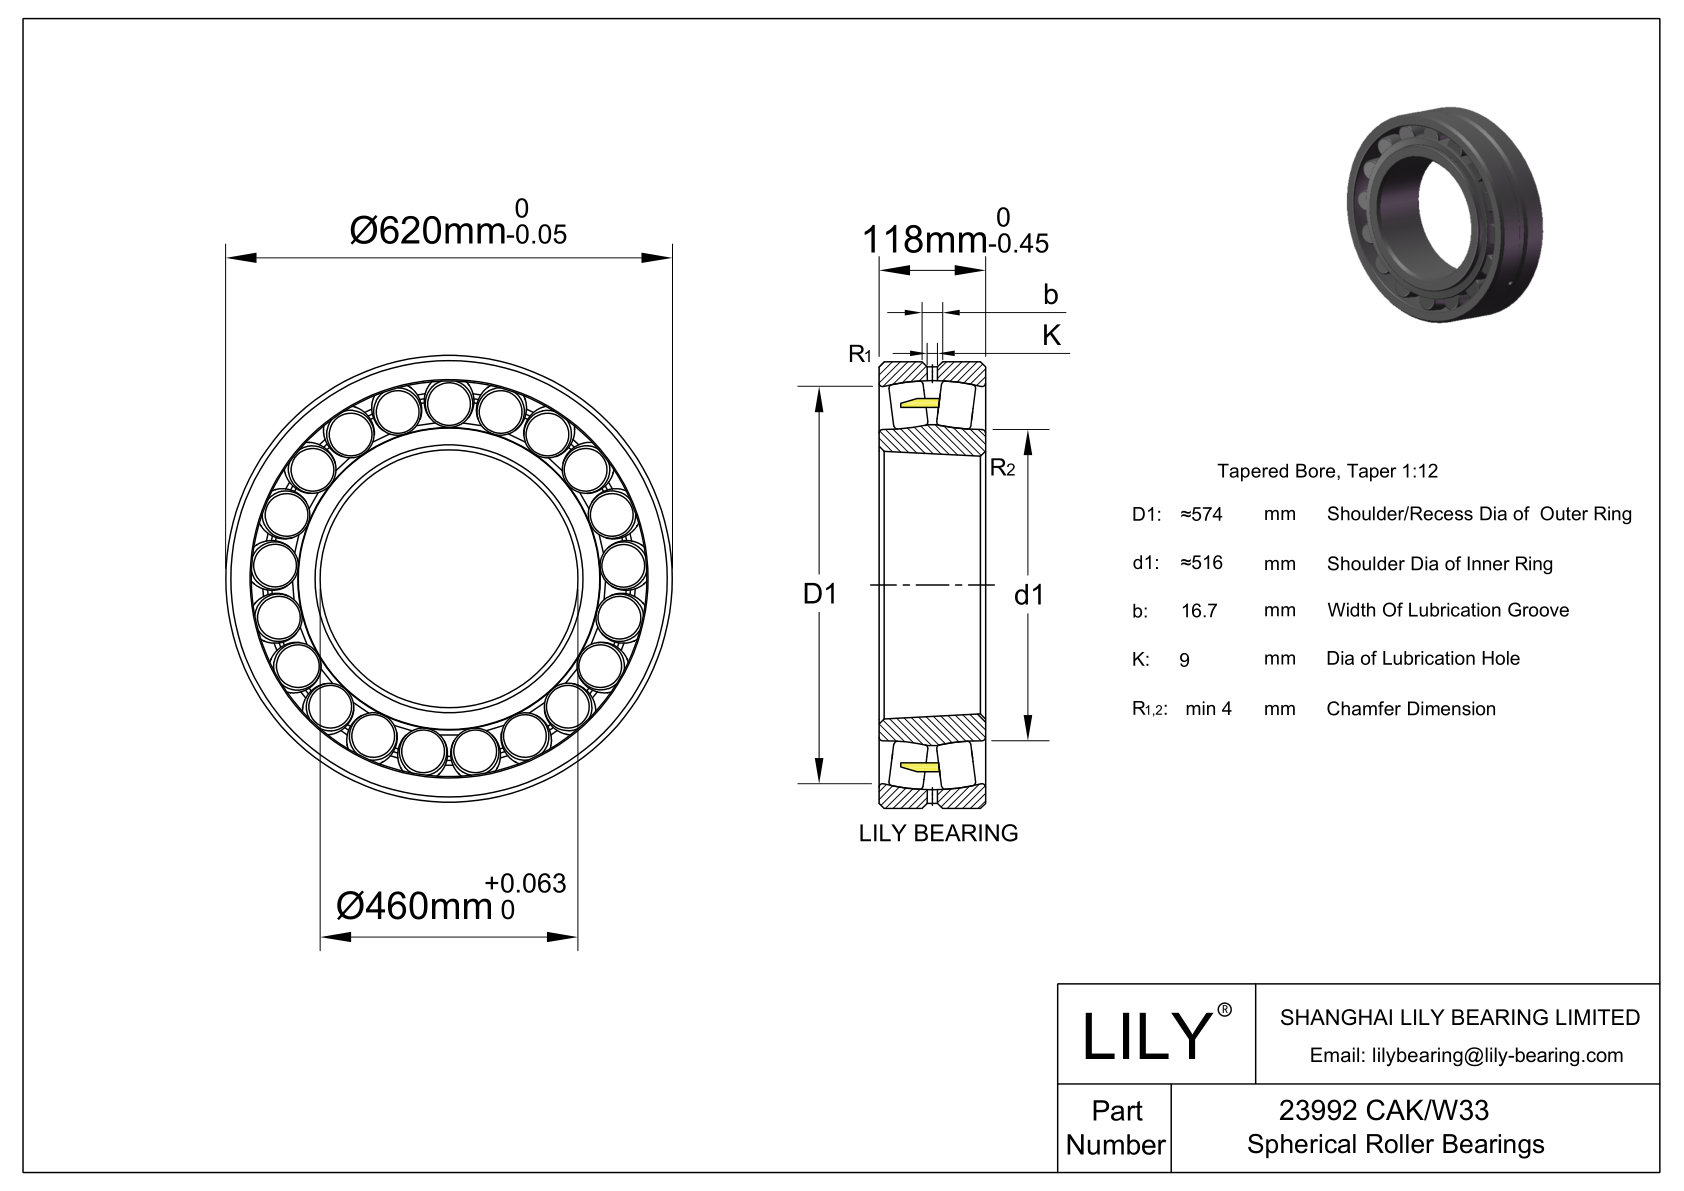 23992 CAK/W33 Double Row Spherical Roller Bearing cad drawing